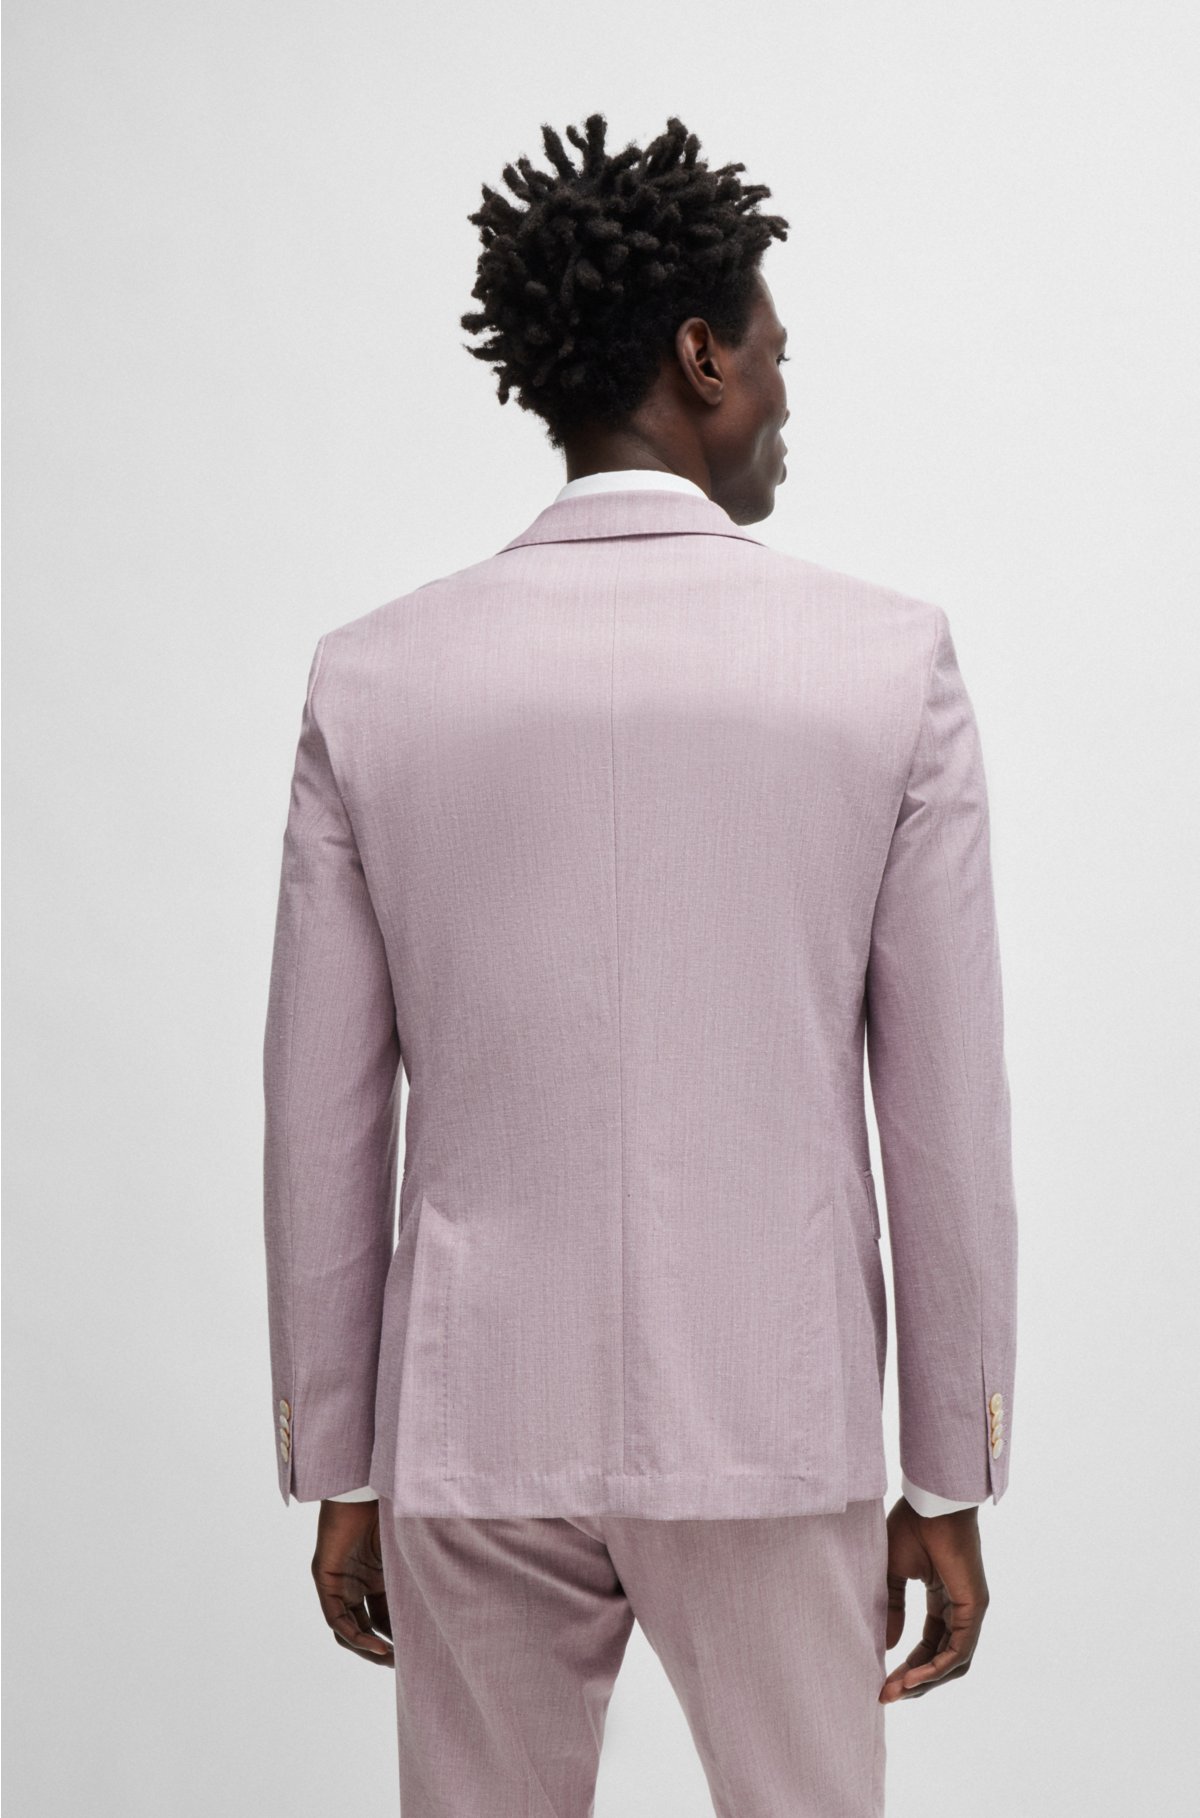 Slim-fit jacket in a micro-patterned cotton blend, light pink